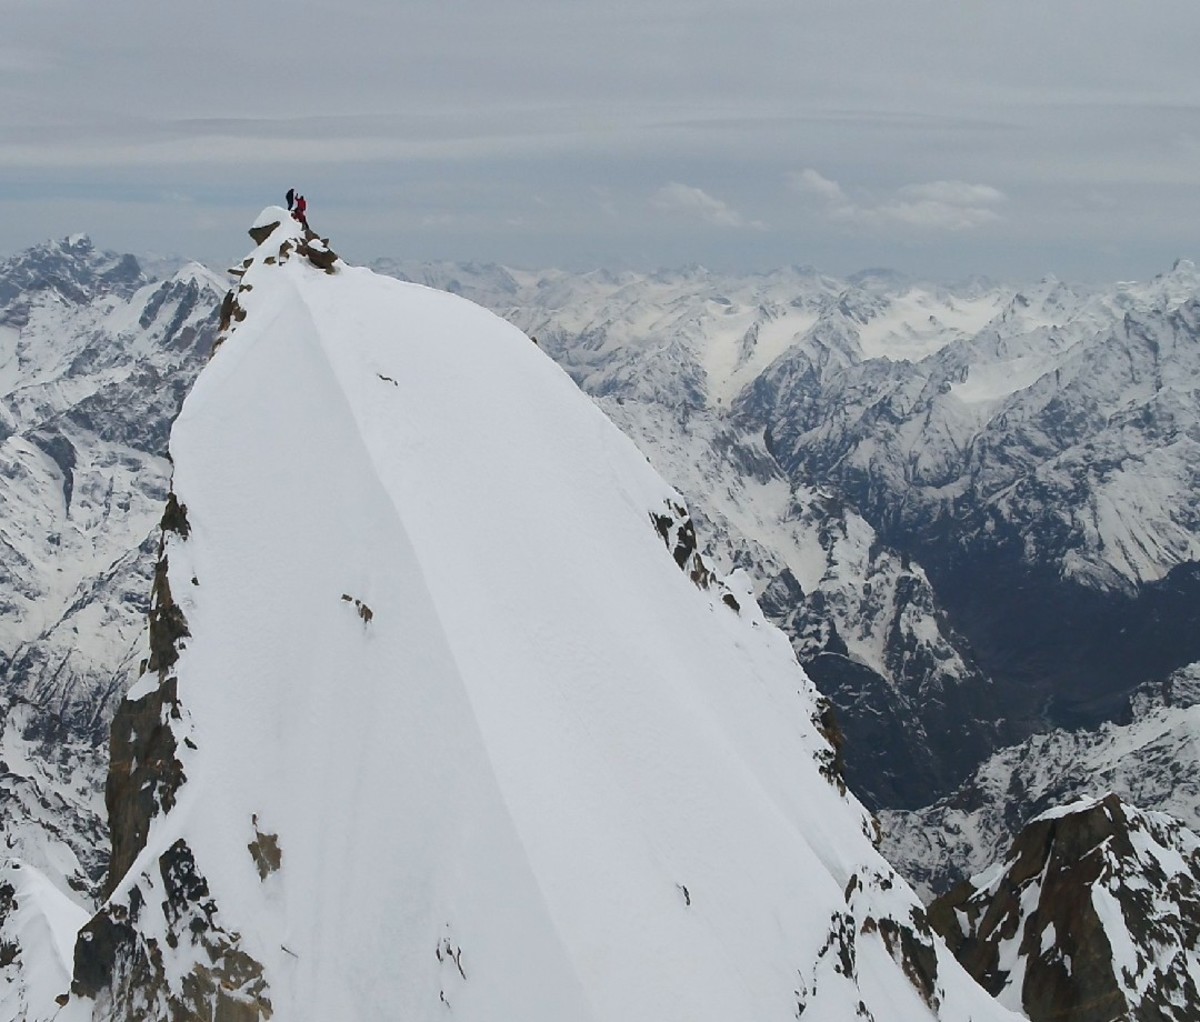 Big Mountain Skiers Sam Anthamatten and Jeremie Heitz at the top of Laila Peak